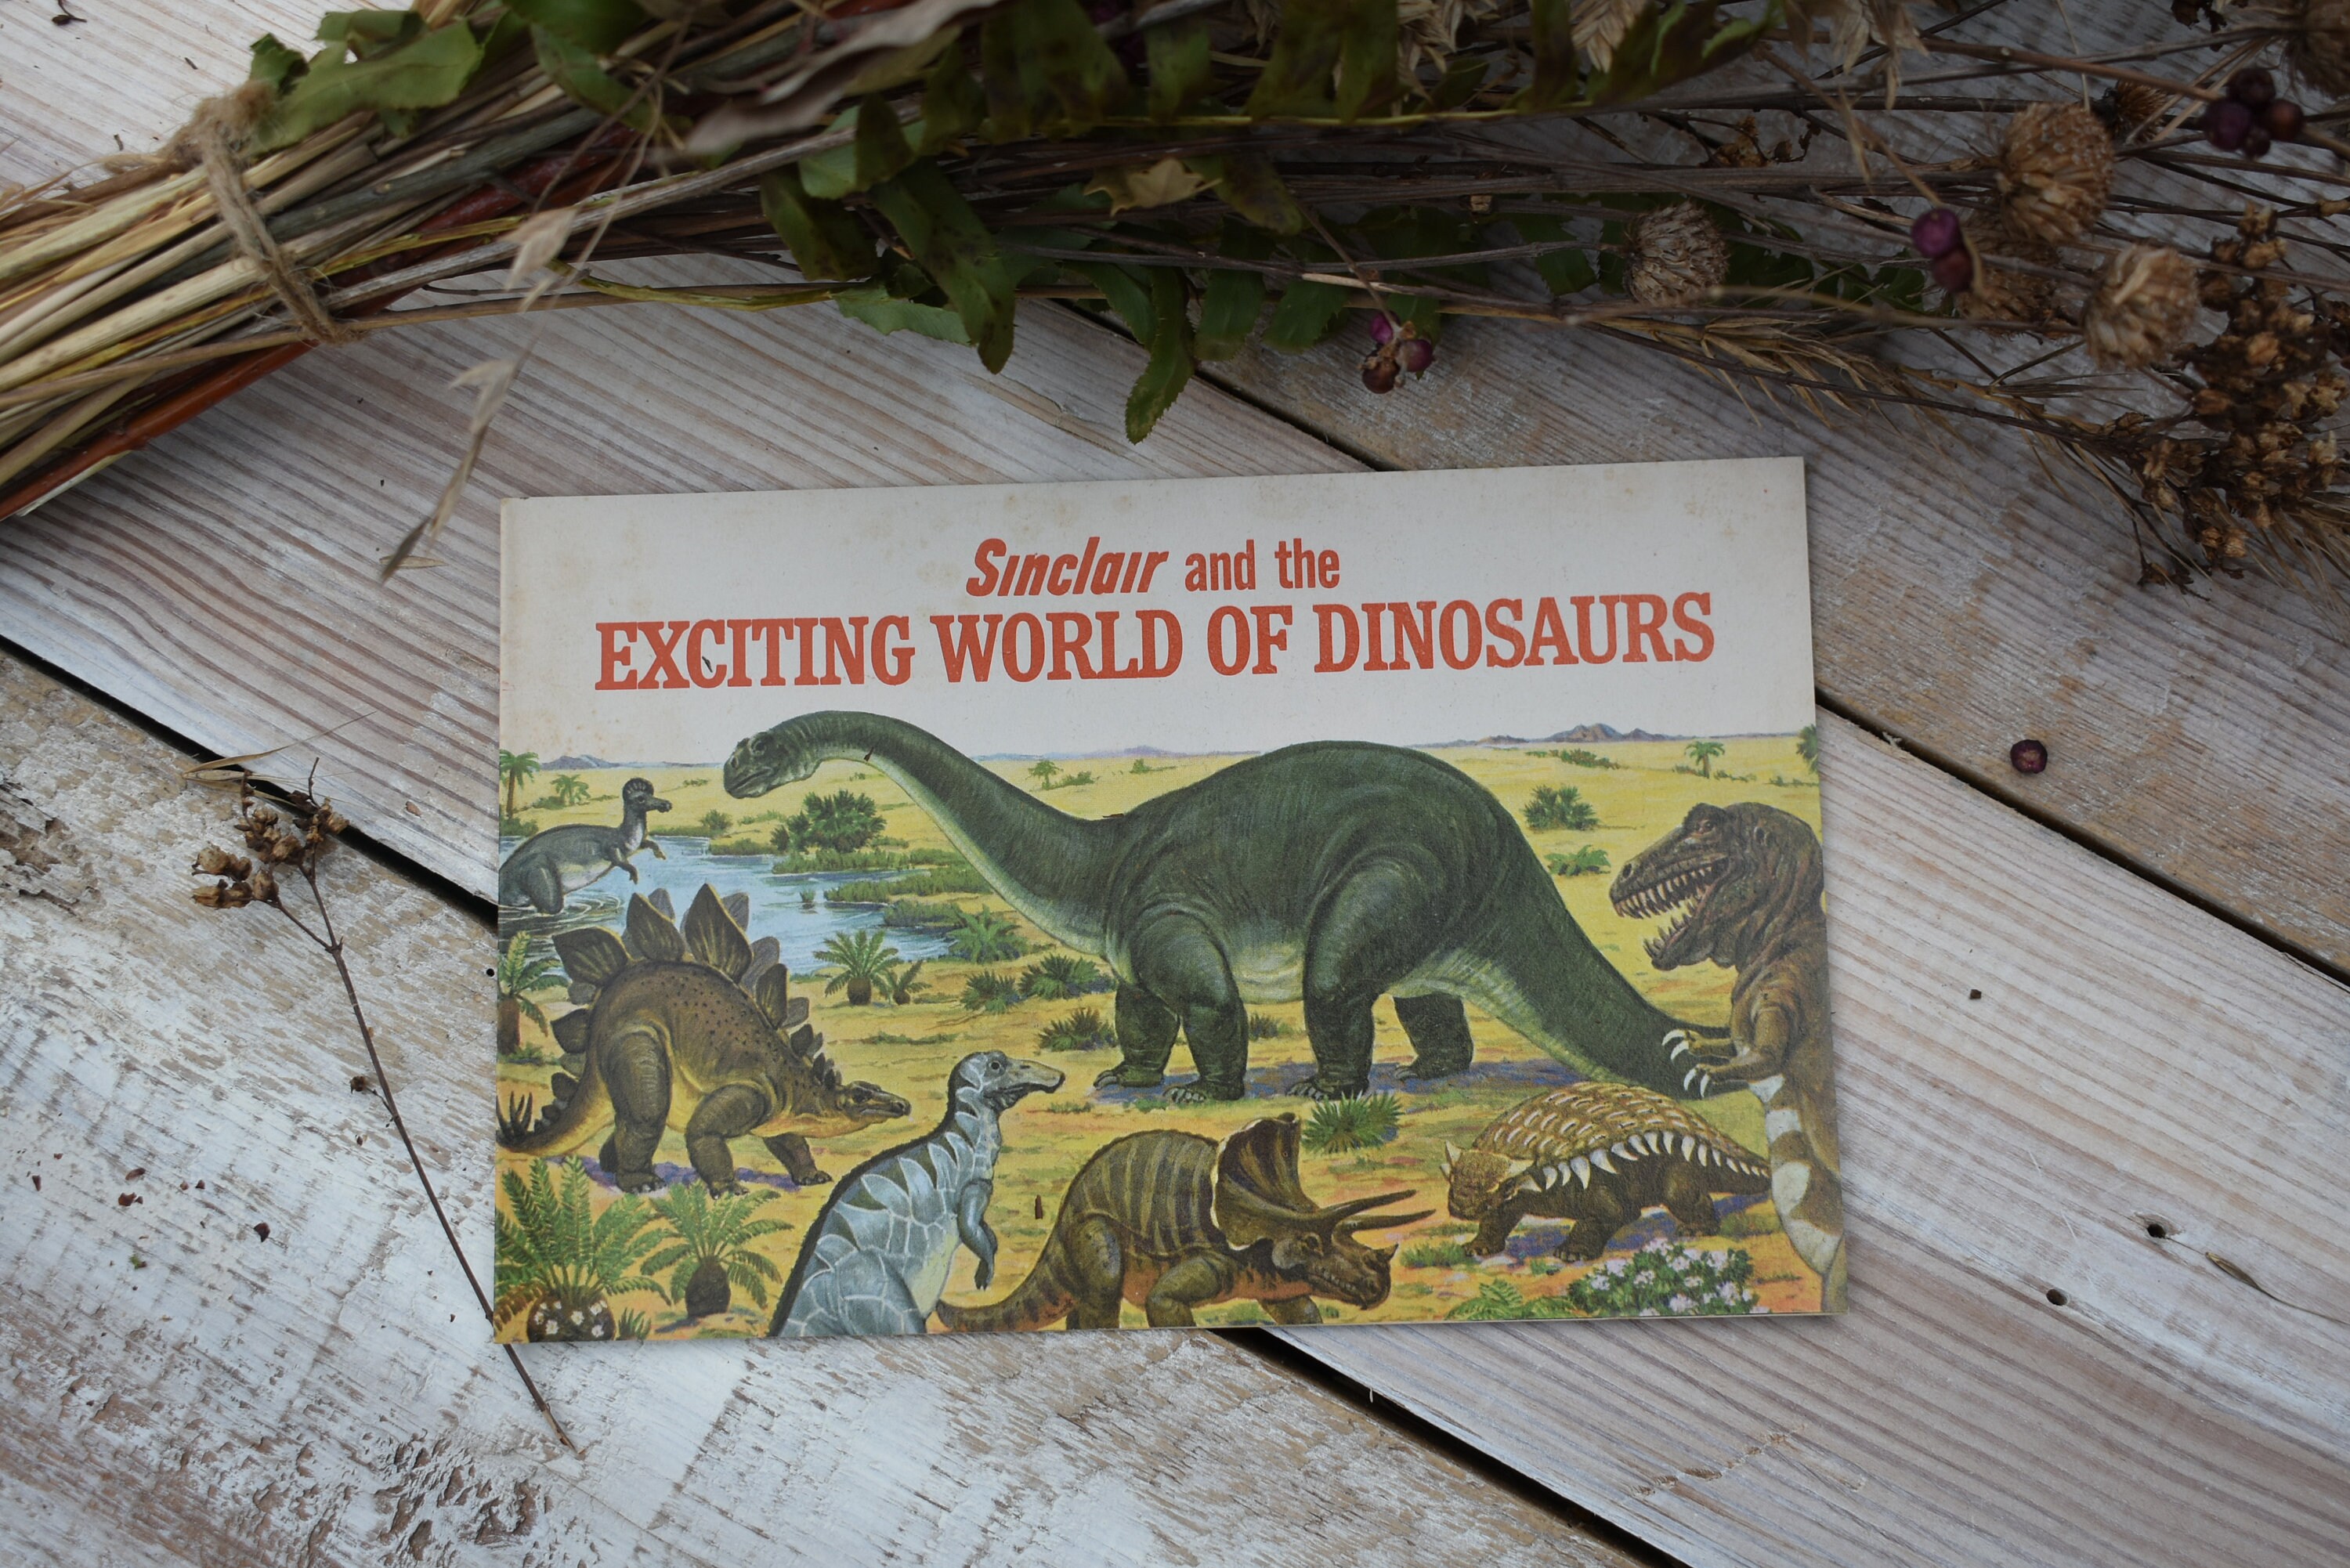 "SINCLAIR AND THE EXCITING WORLD OF DINOSAURS" Booklet world's fair 1 1967 